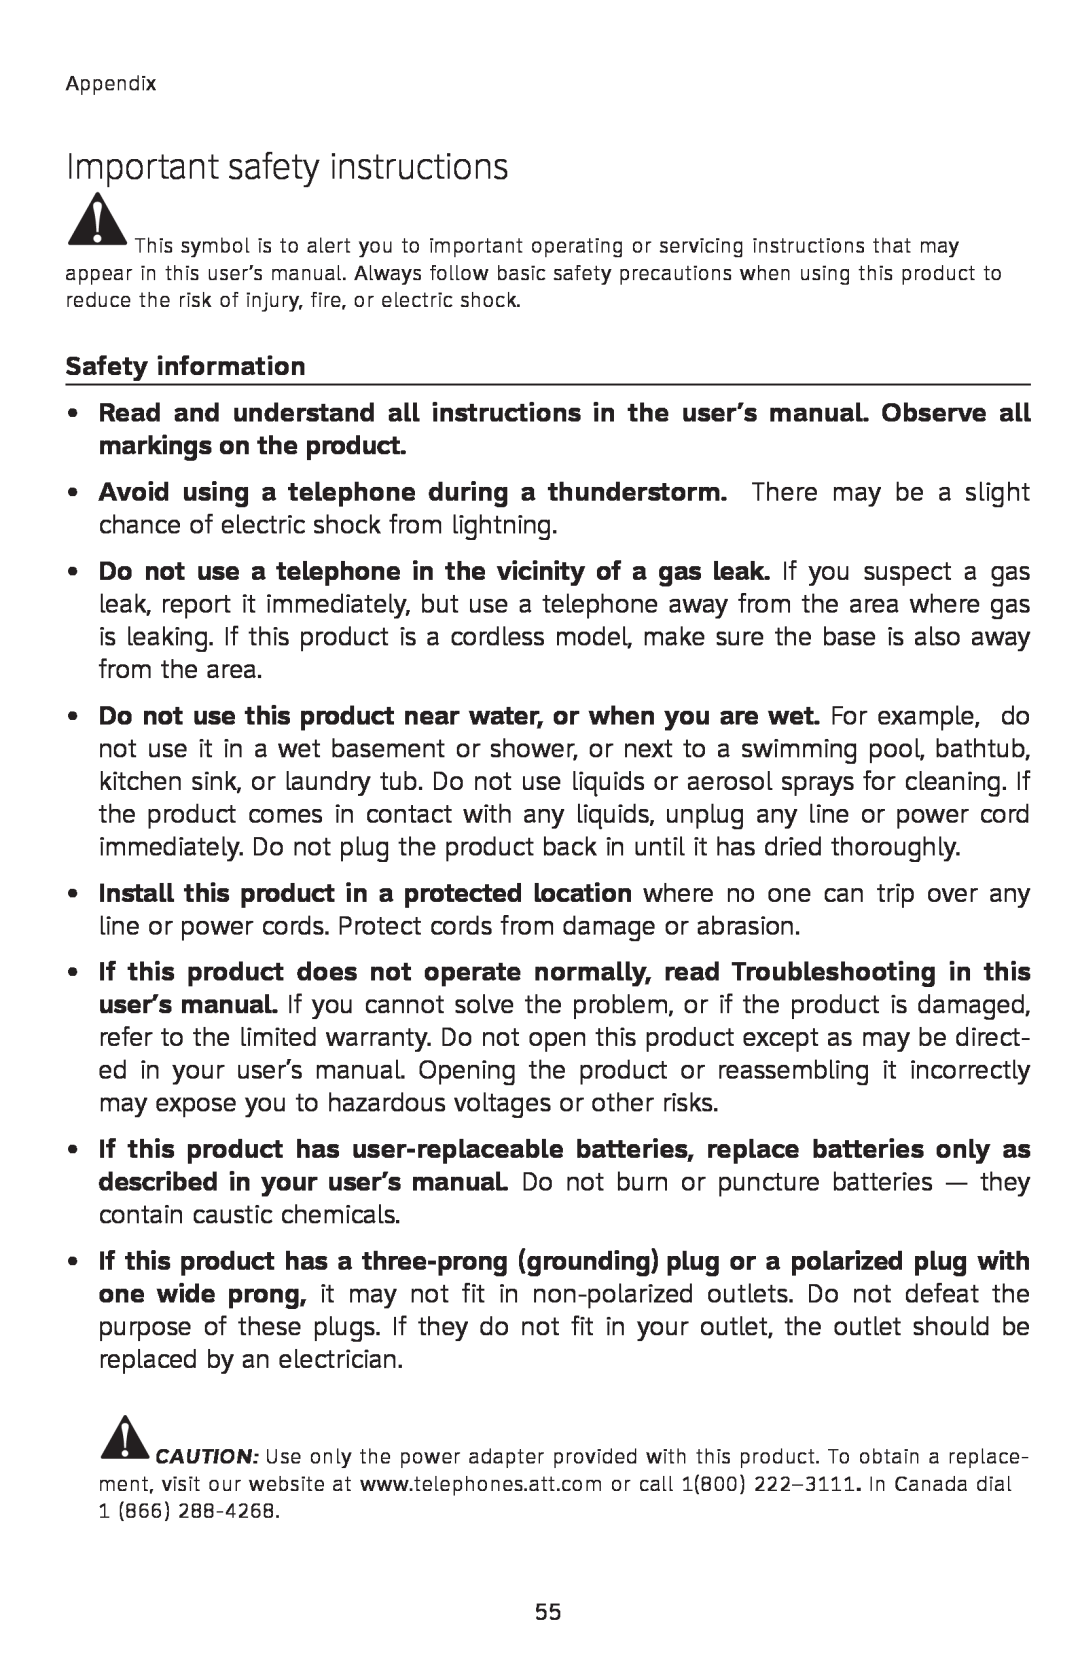 AT&T E2912 user manual Important safety instructions, Safety information 